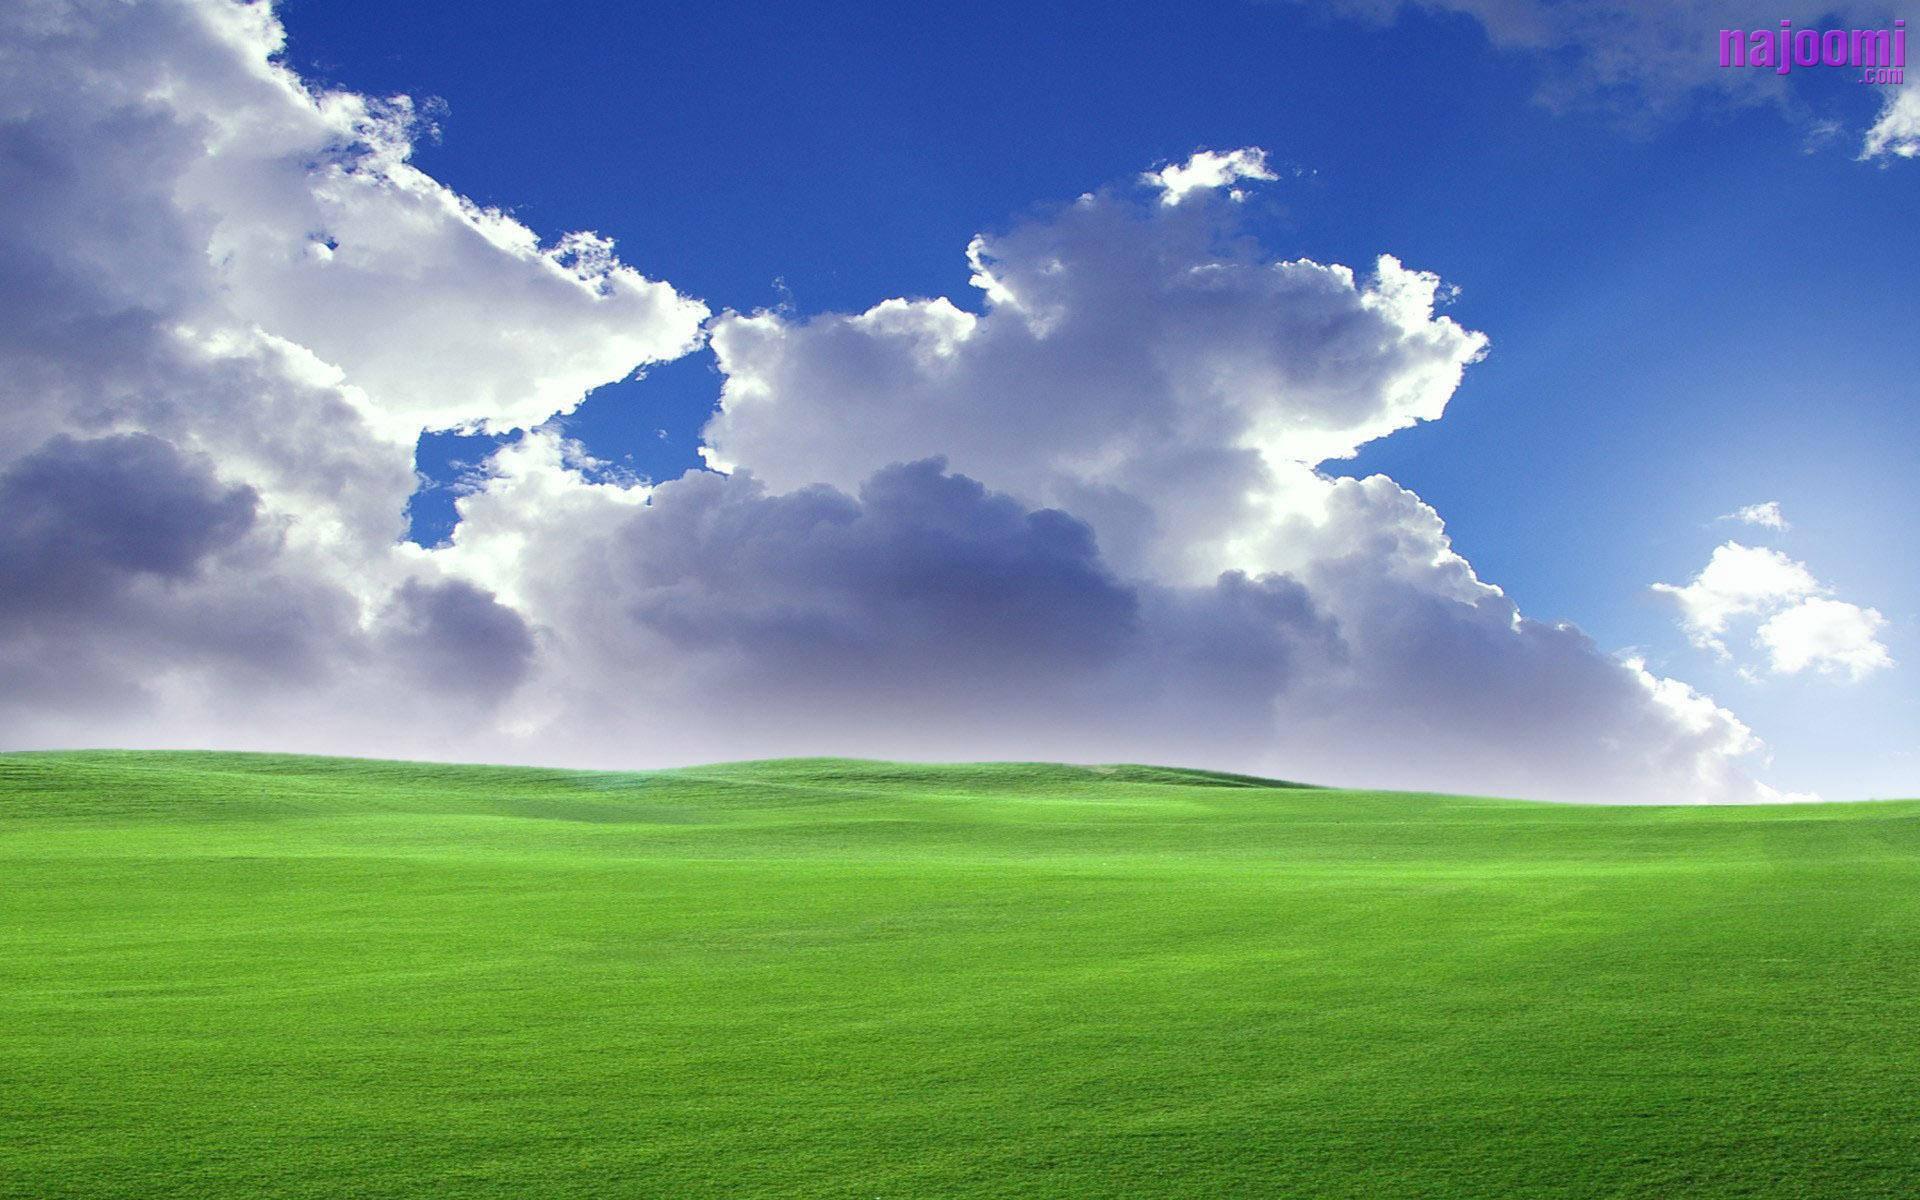 4CYCLISTS version of iconic Windows XP wallpaper